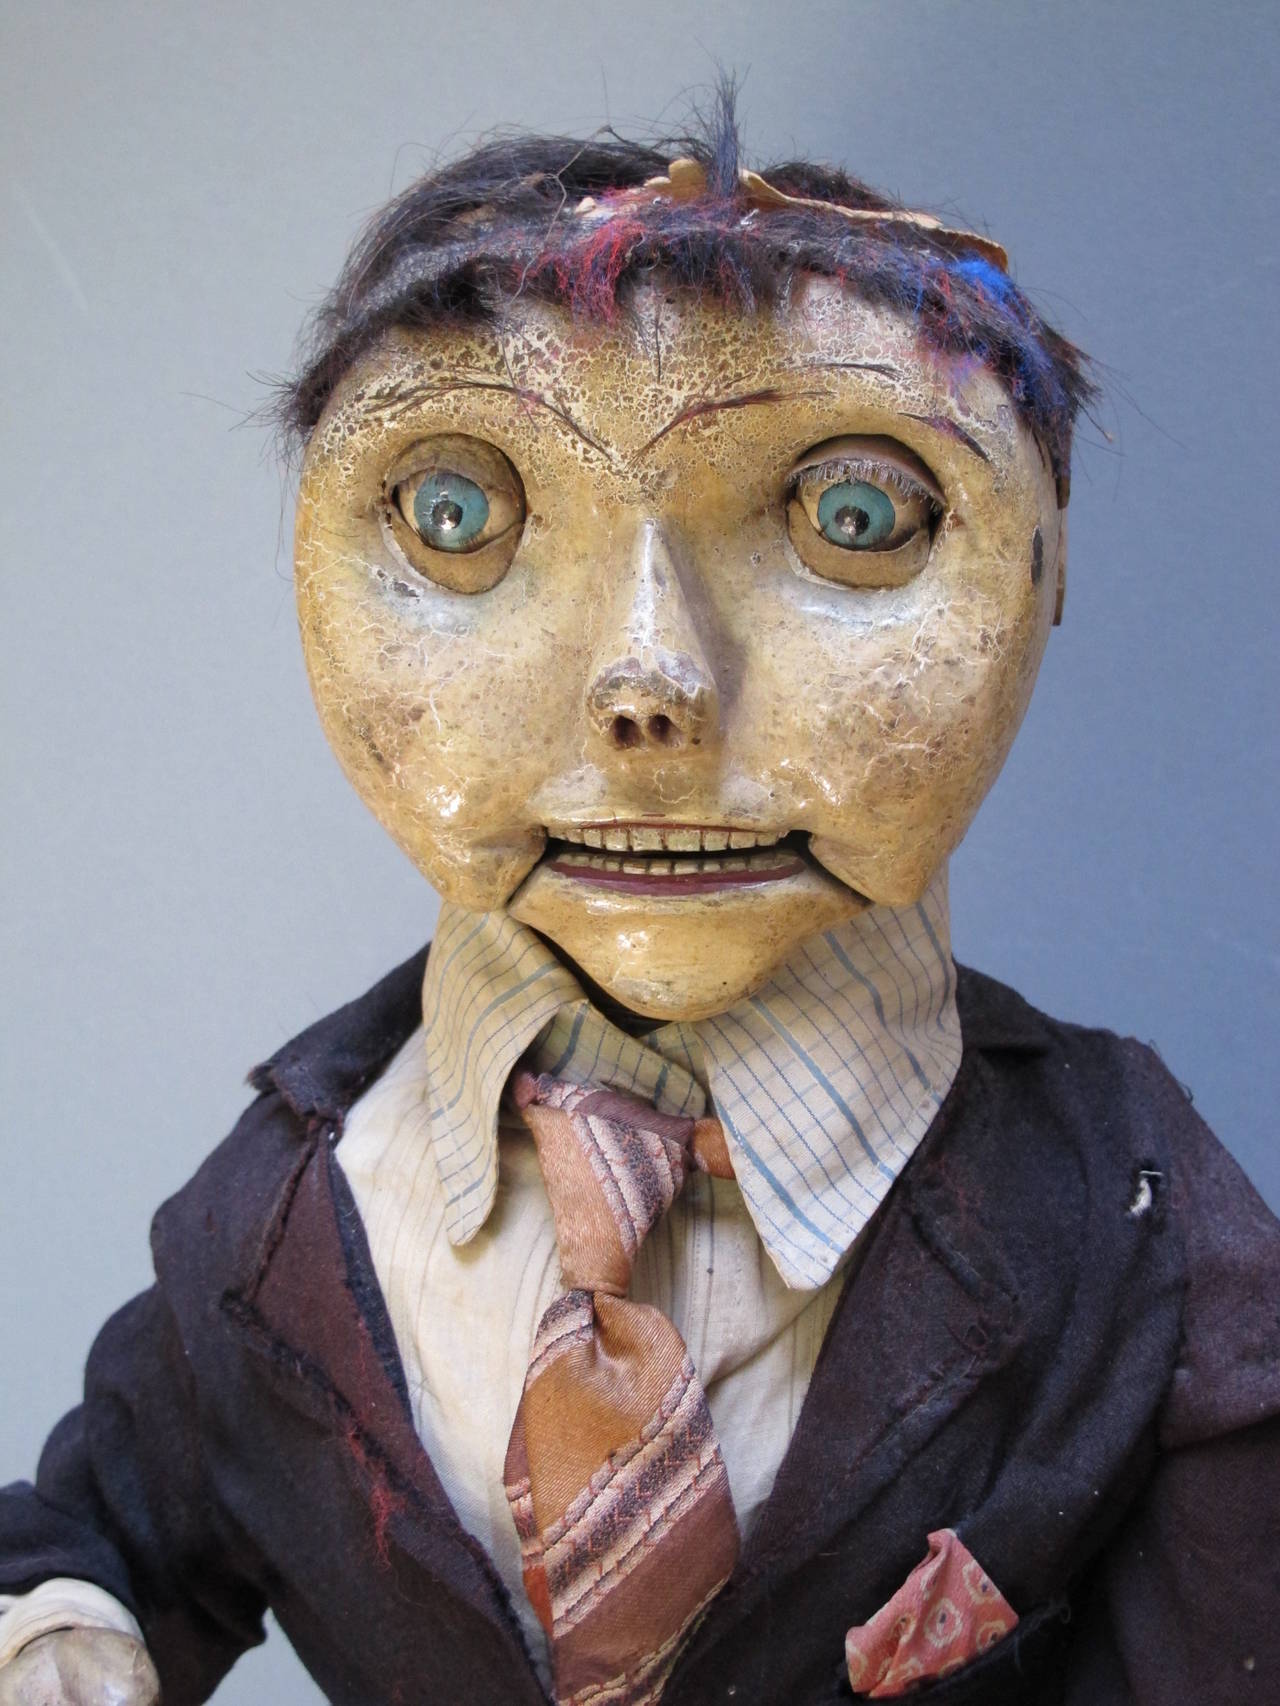 The early ventriloquist figure has a carved wood head with articulated mouth and great painted surface. The moveable arm has well carved hands in different positions. He is well dressed in suit and tie and has small leather shoes on.
The figure has